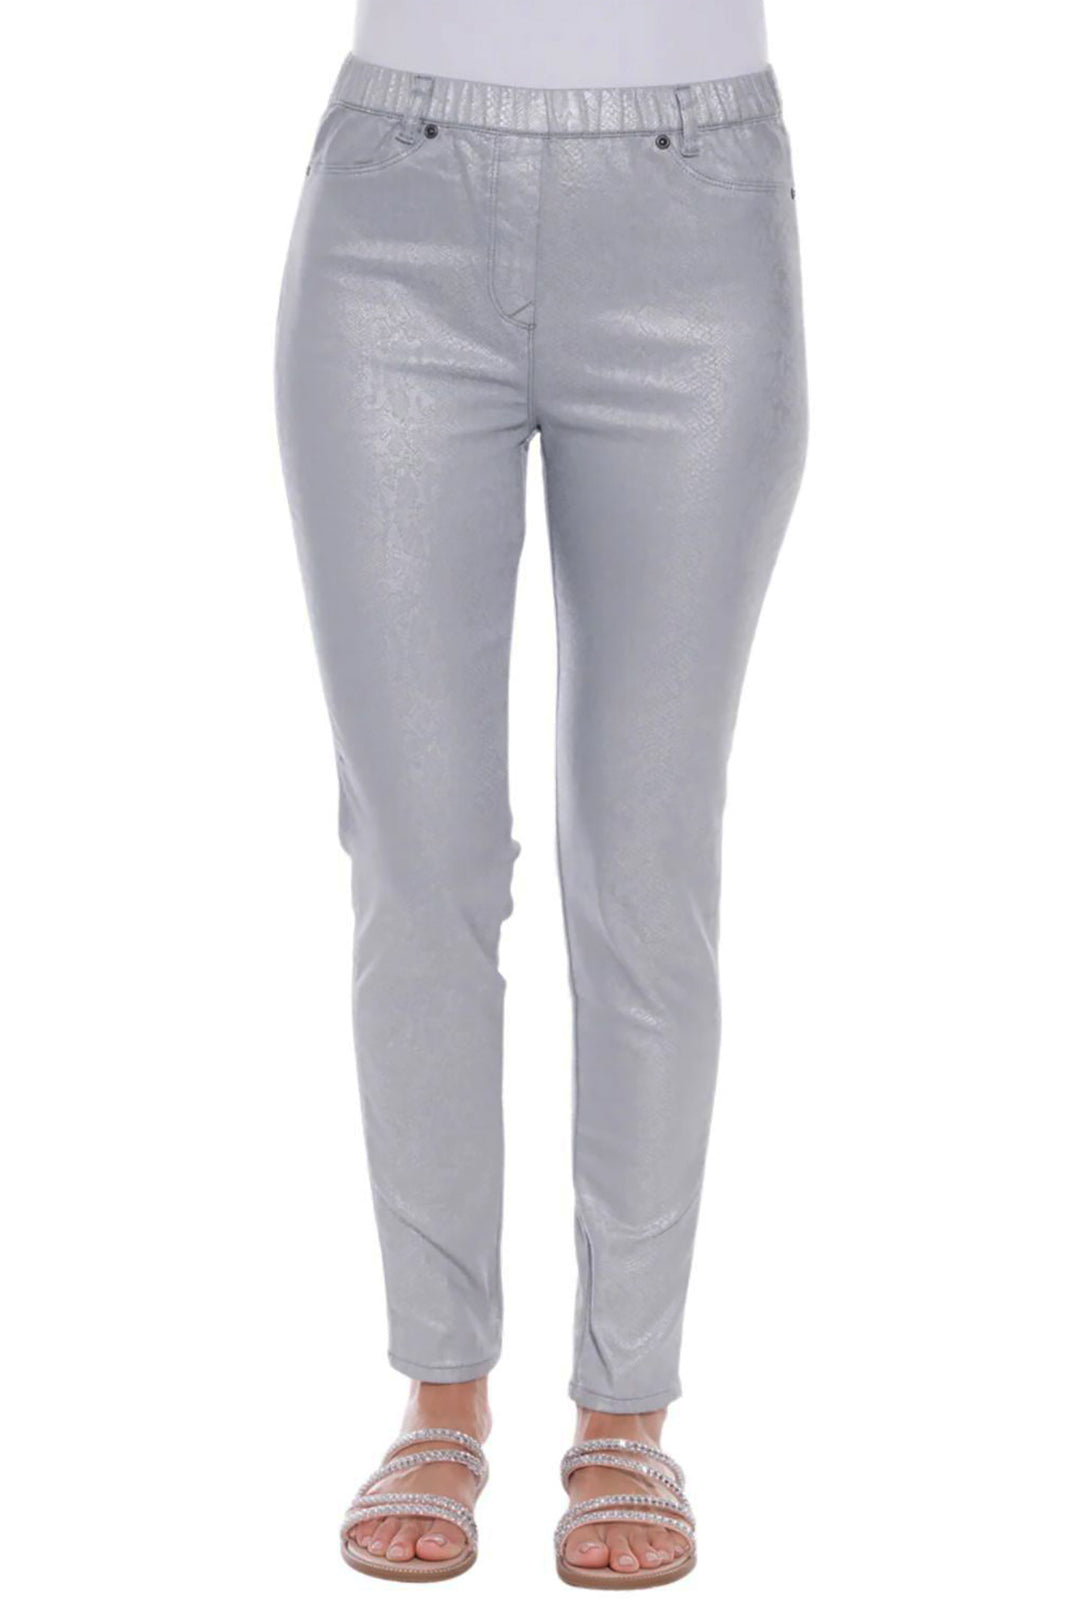 Woman wearing silver foil pants by Cafe Latte Clothing, sold and shipped from Pizazz Boutique online women's clothes shops Australia